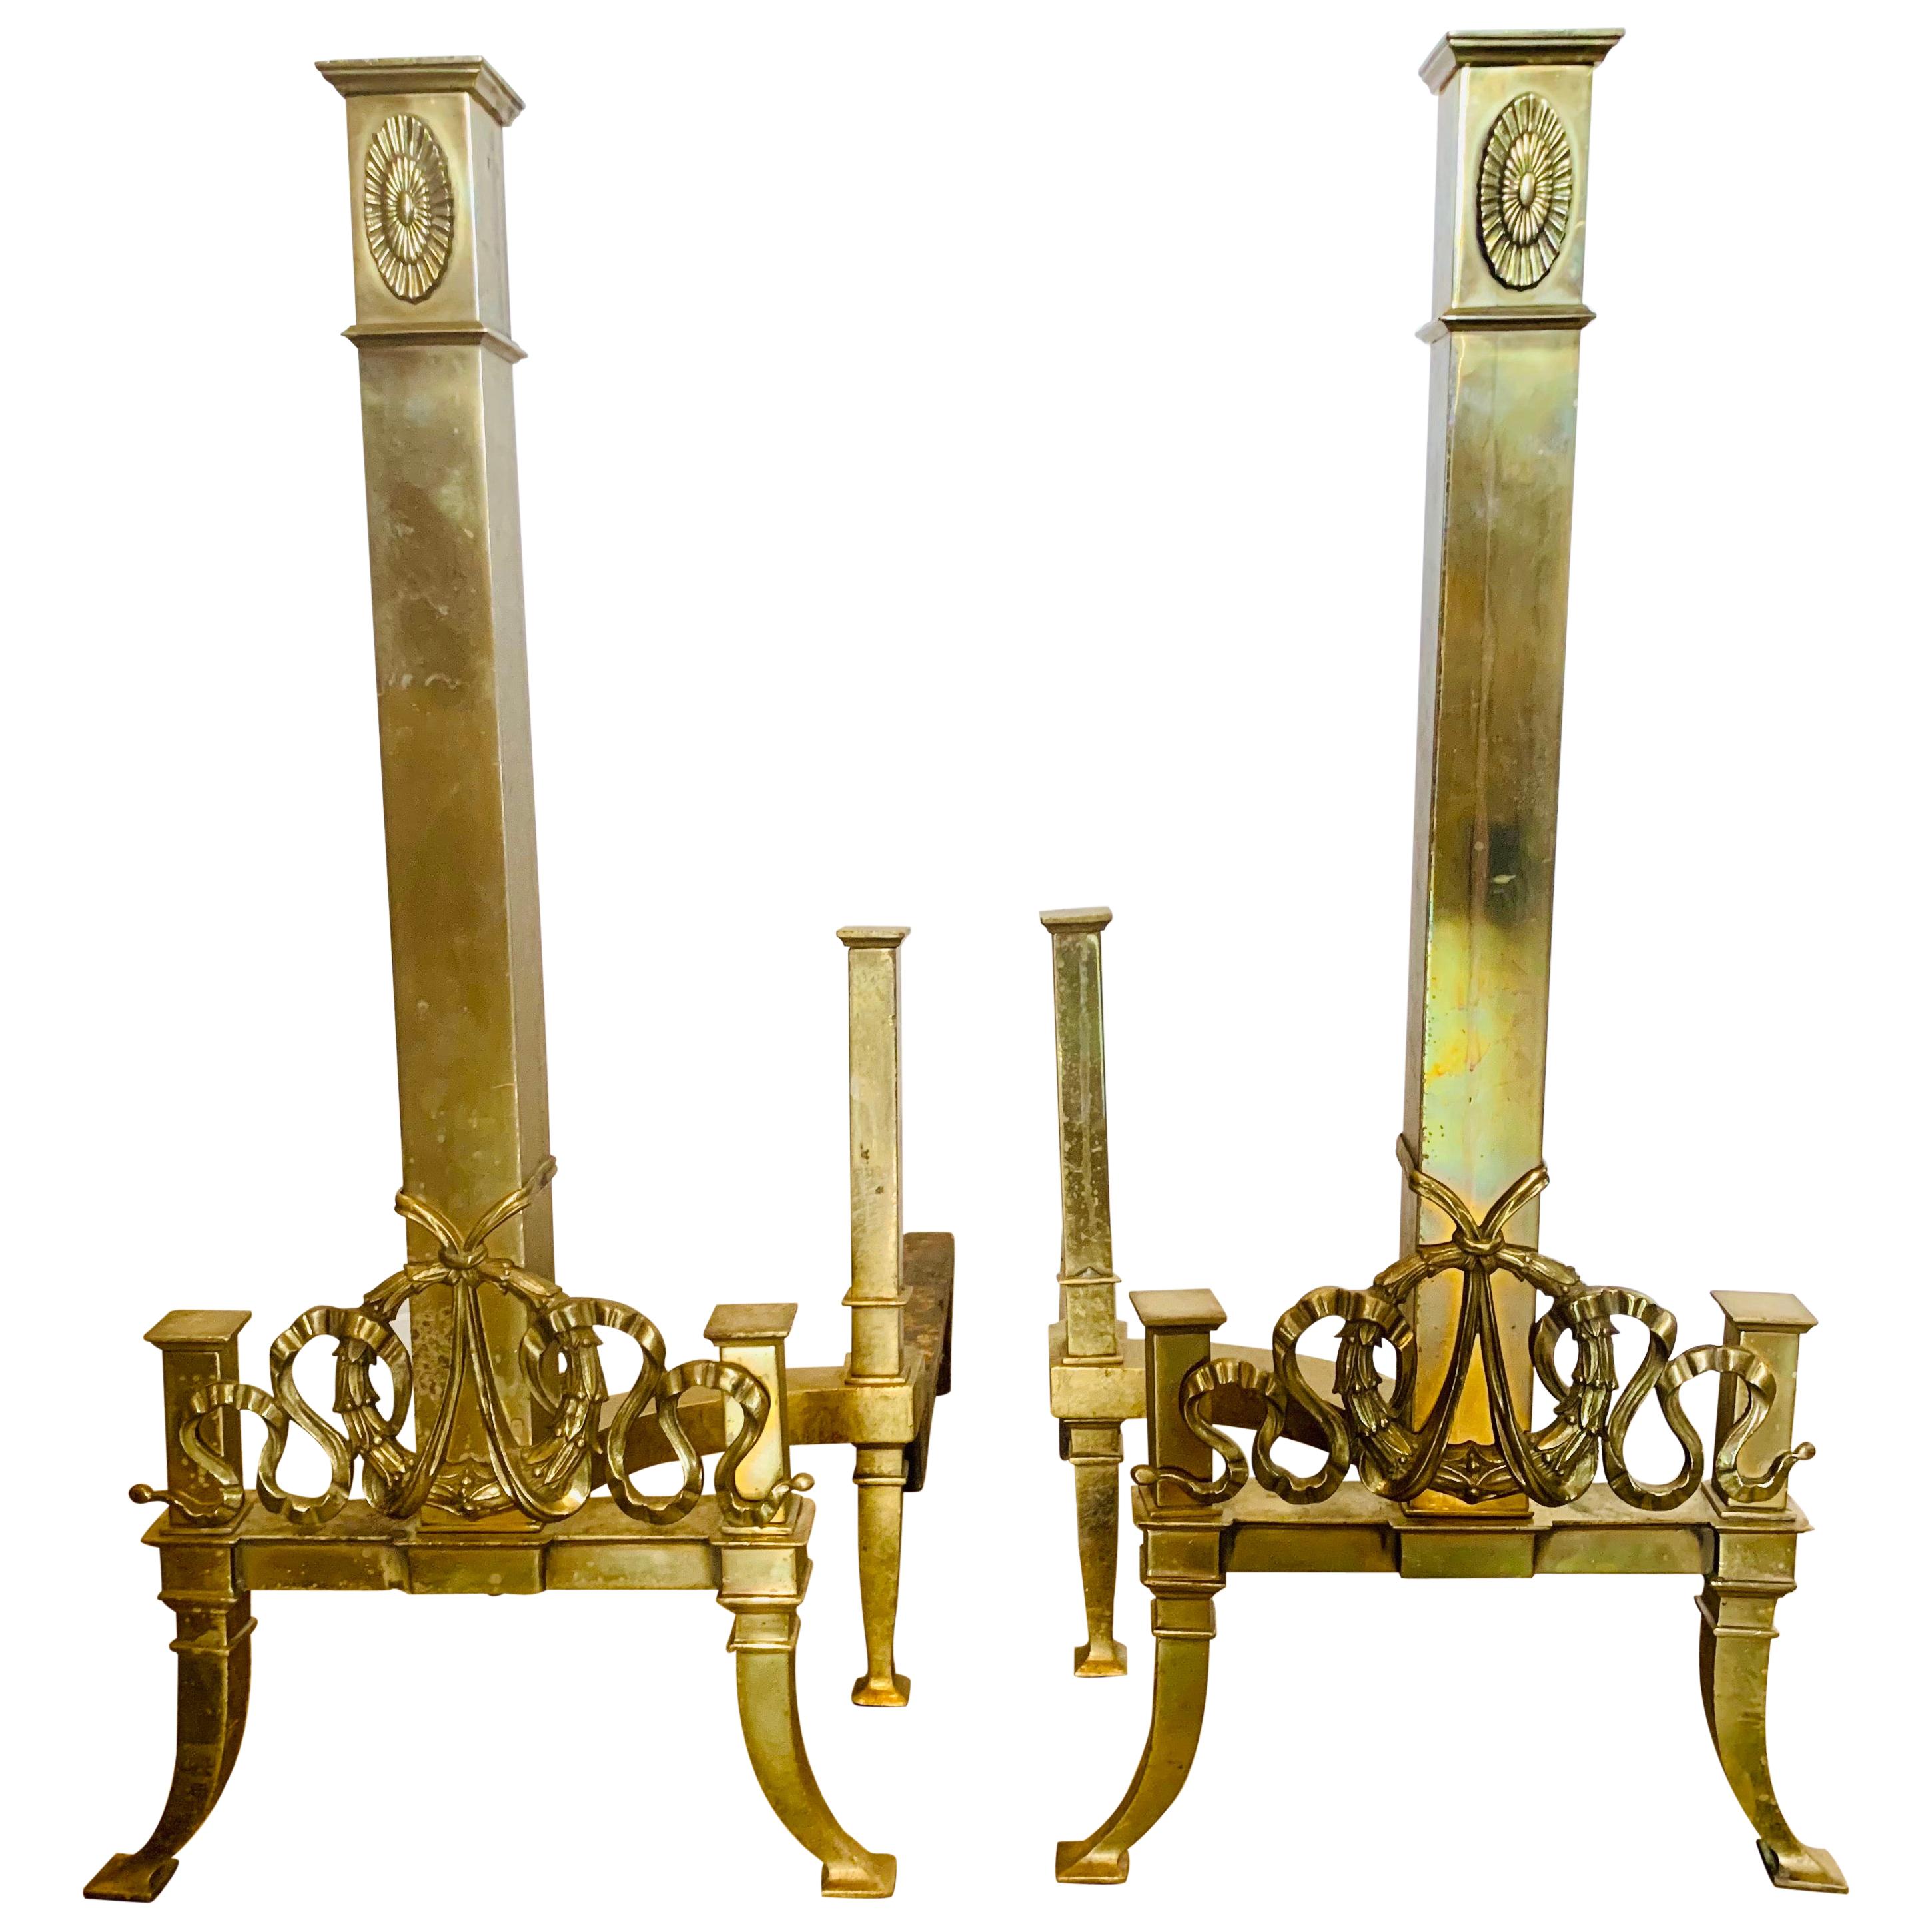 Tall Neoclassical Brass Ornate Column Form Andirons  For Sale